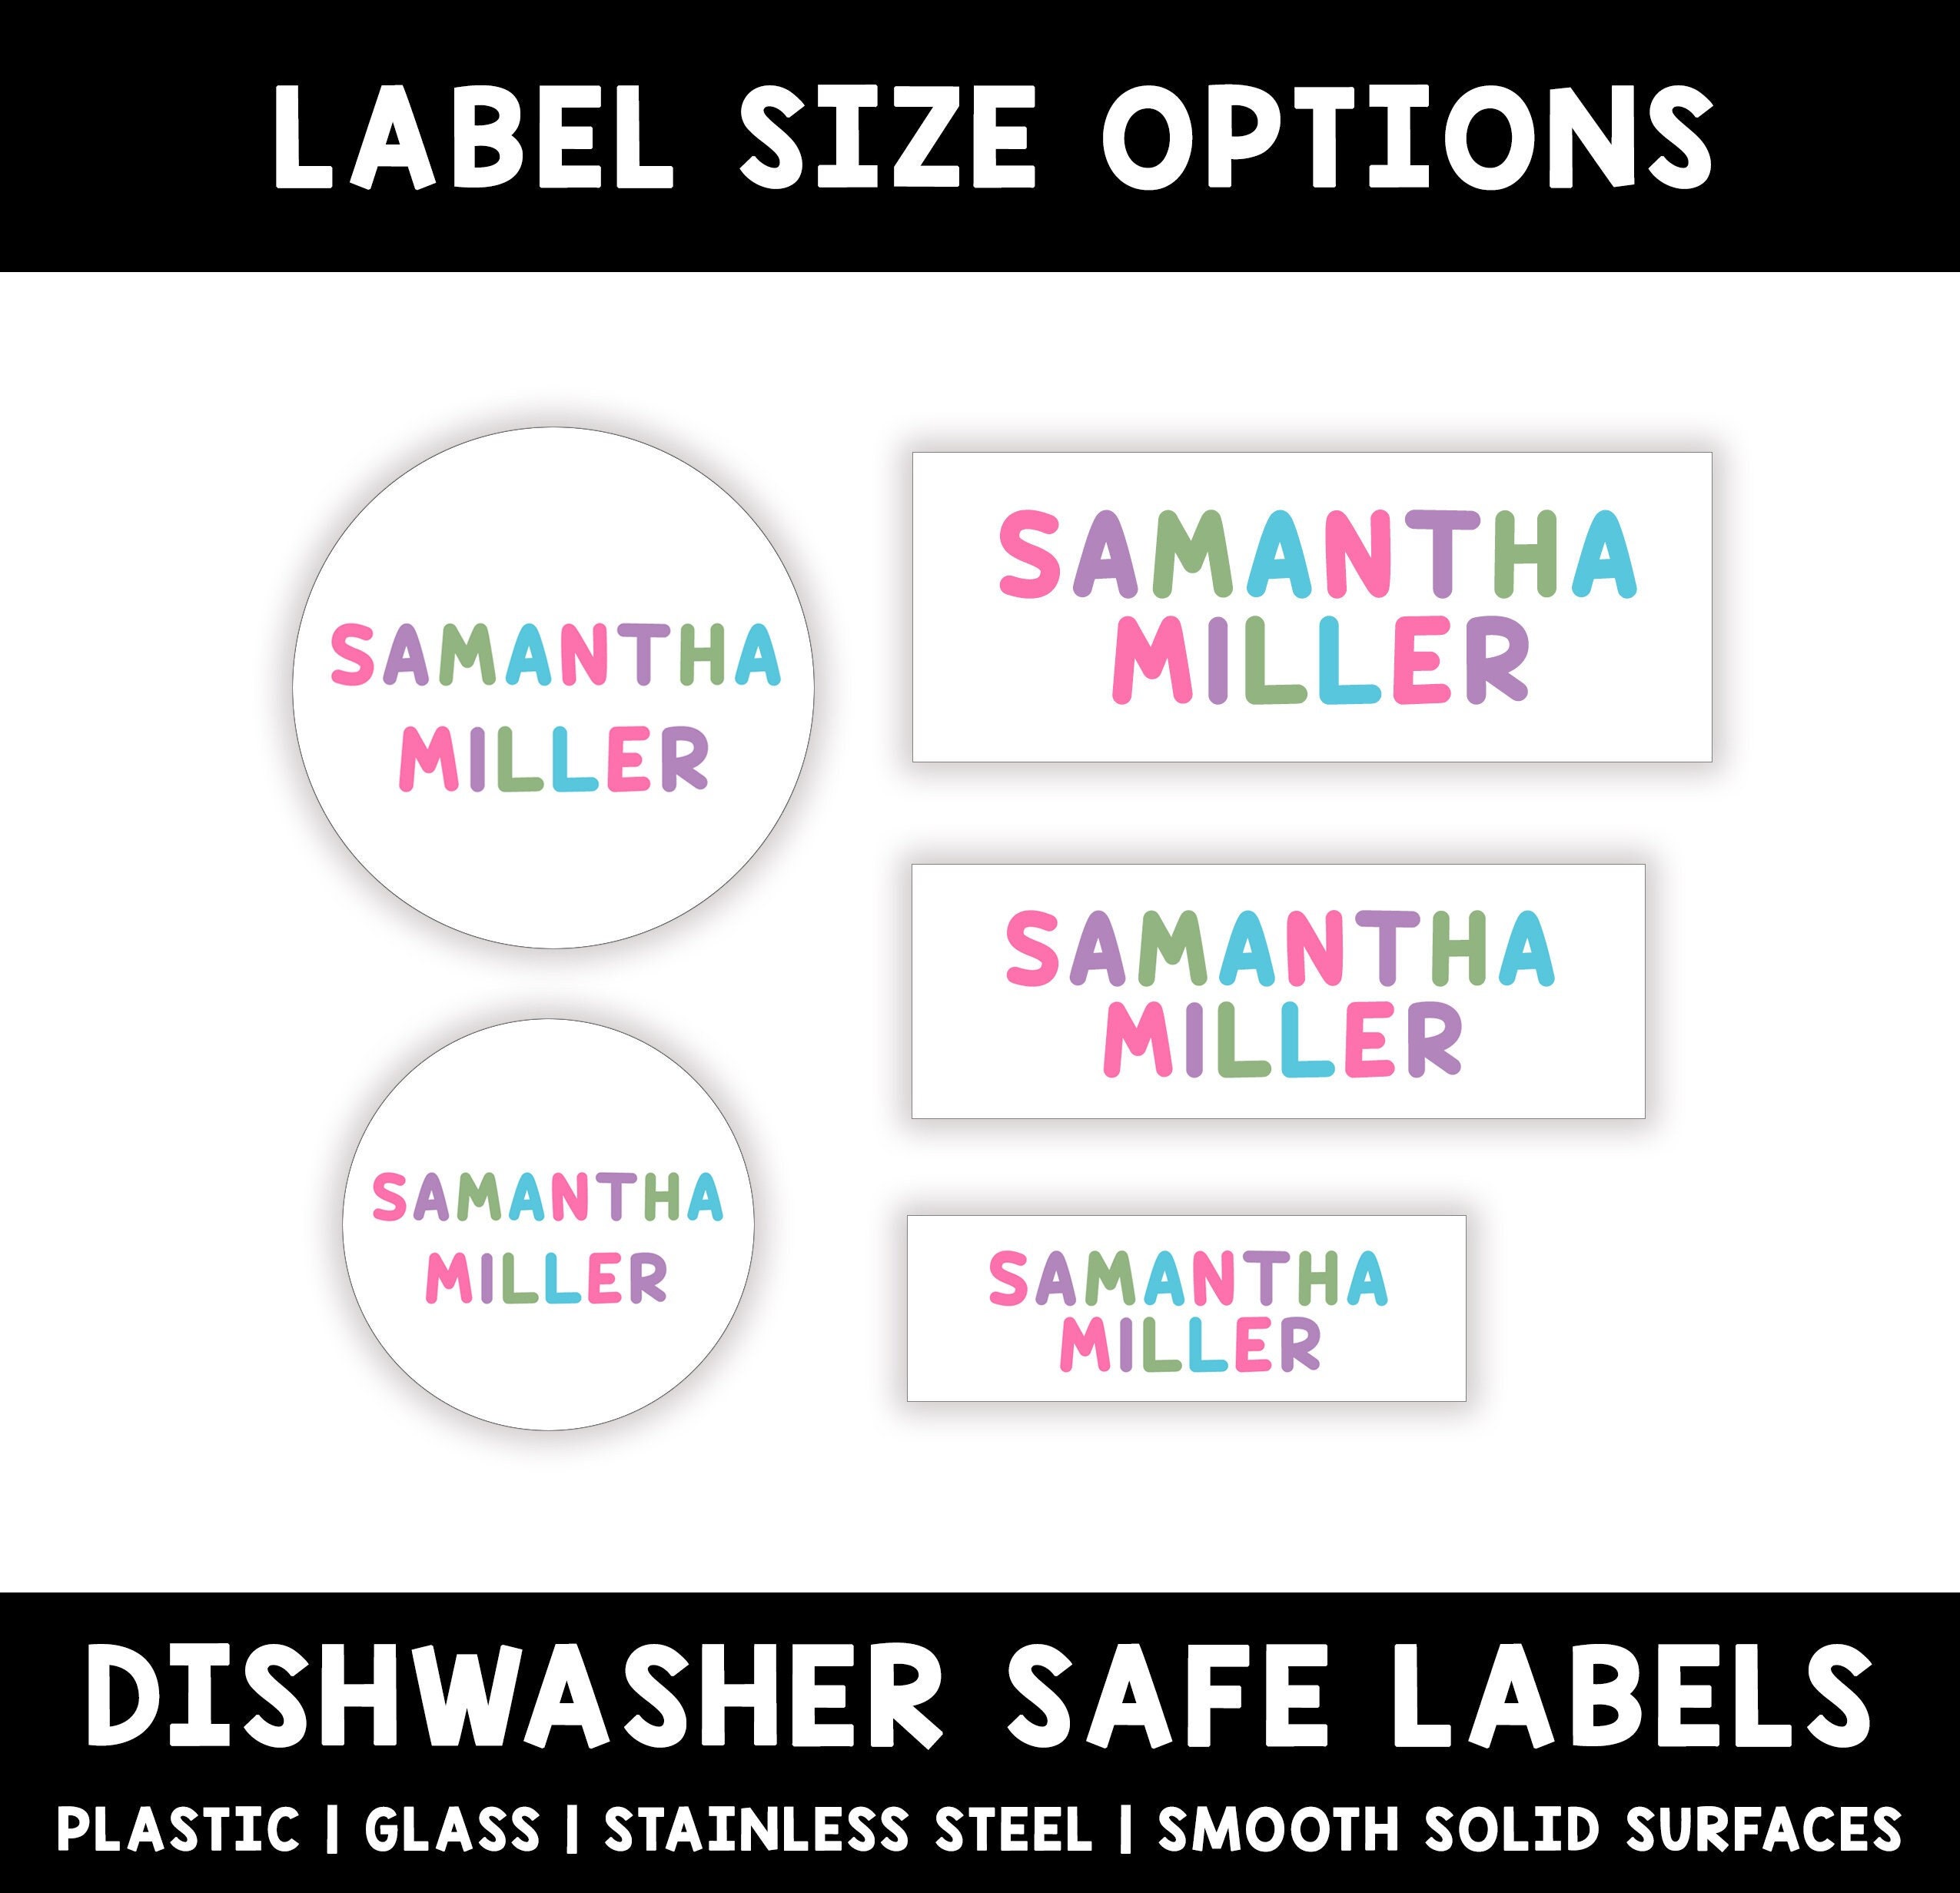 100 Personalized Clothing Labels for Kids Washable Sew in/Iron on Name Labels for Clothing for Daycare, School, Nursing Homes, Camp - 1.5x0.55